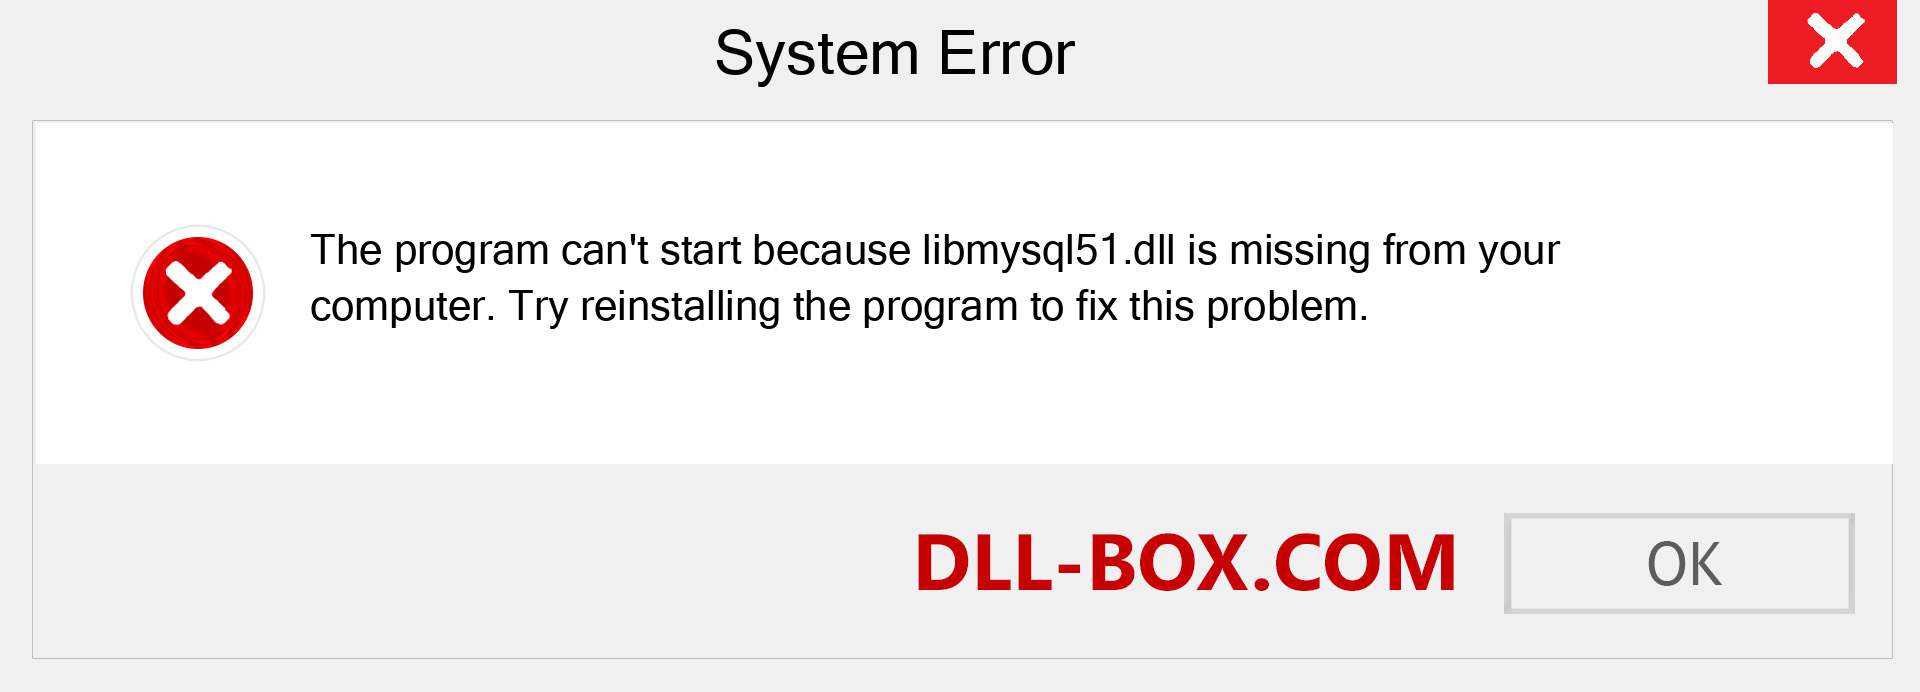  libmysql51.dll file is missing?. Download for Windows 7, 8, 10 - Fix  libmysql51 dll Missing Error on Windows, photos, images